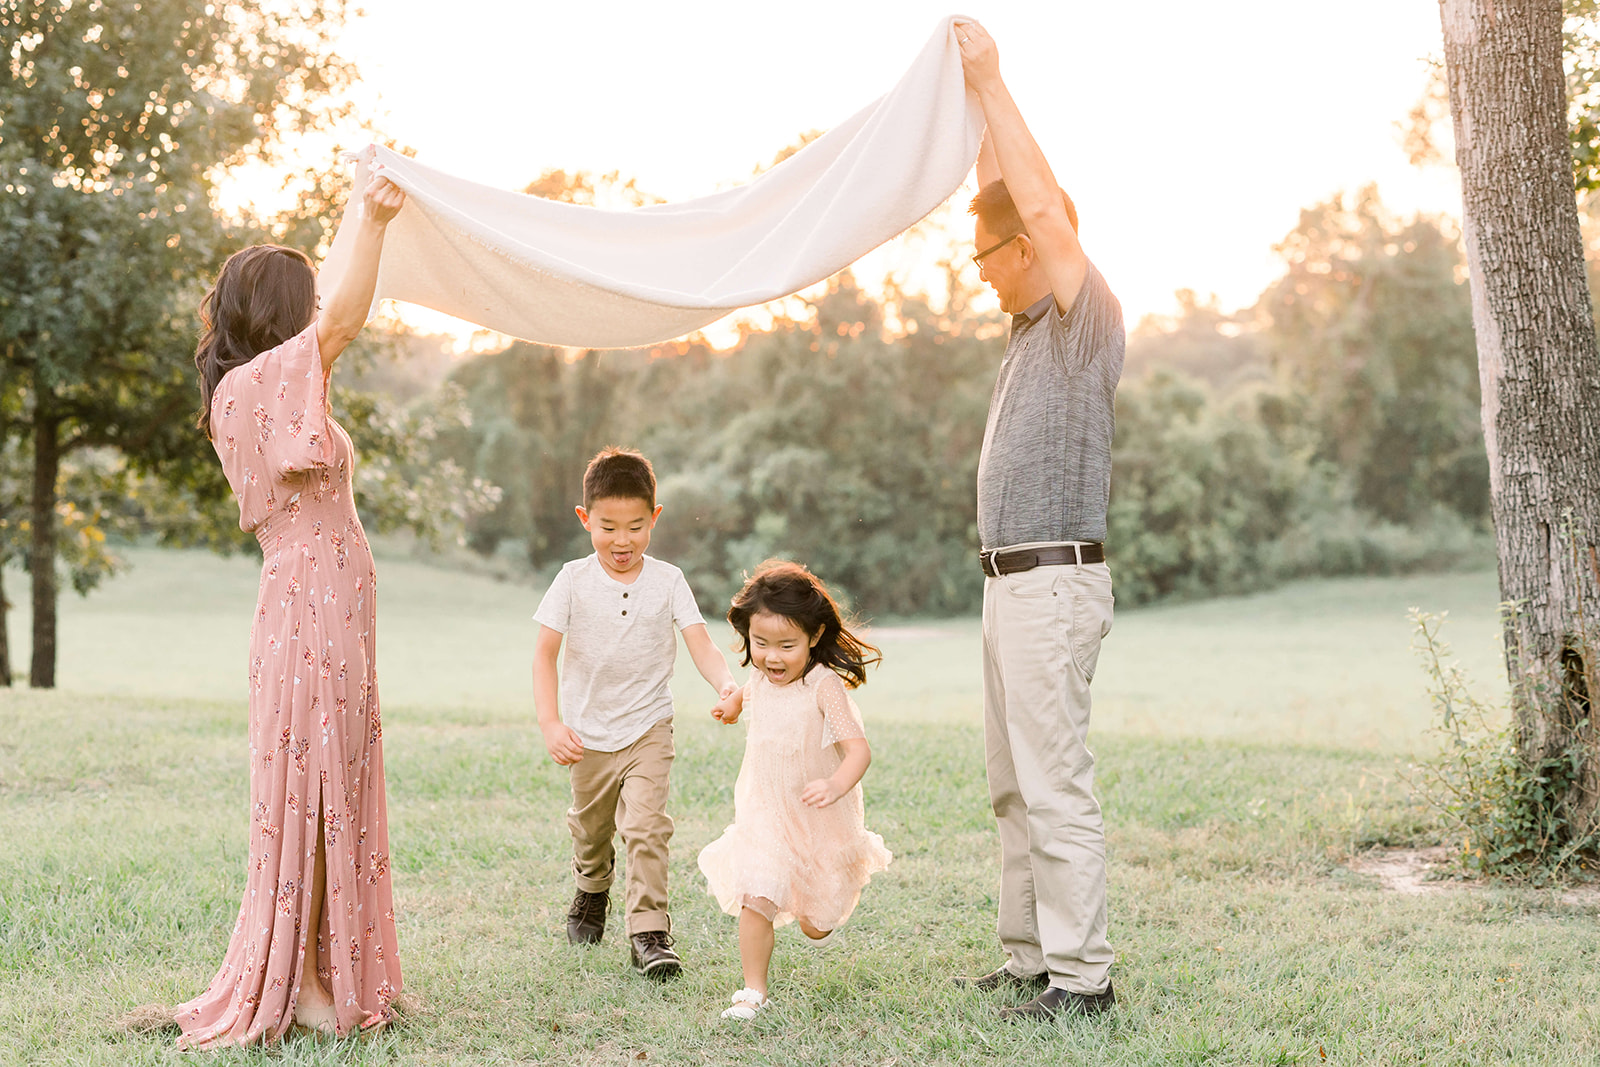 A toddler boy and his younger sister run under a blanket holding hands being held up by mom and dad in a park at sunset after visiting Dentini Pediatric Dentistry